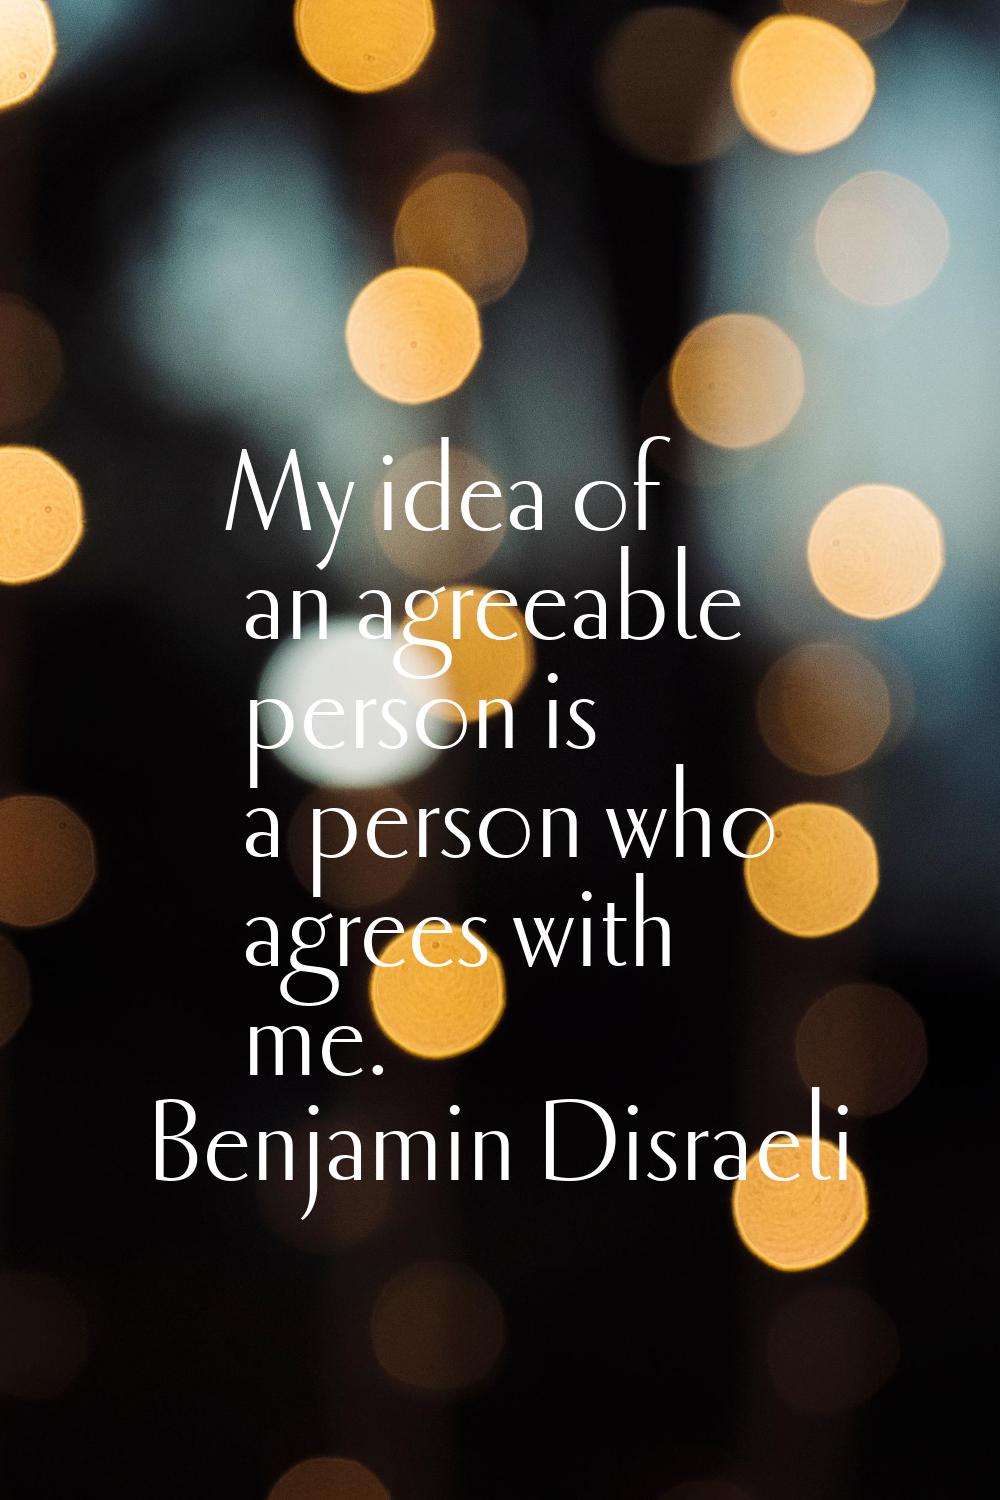 My idea of an agreeable person is a person who agrees with me.